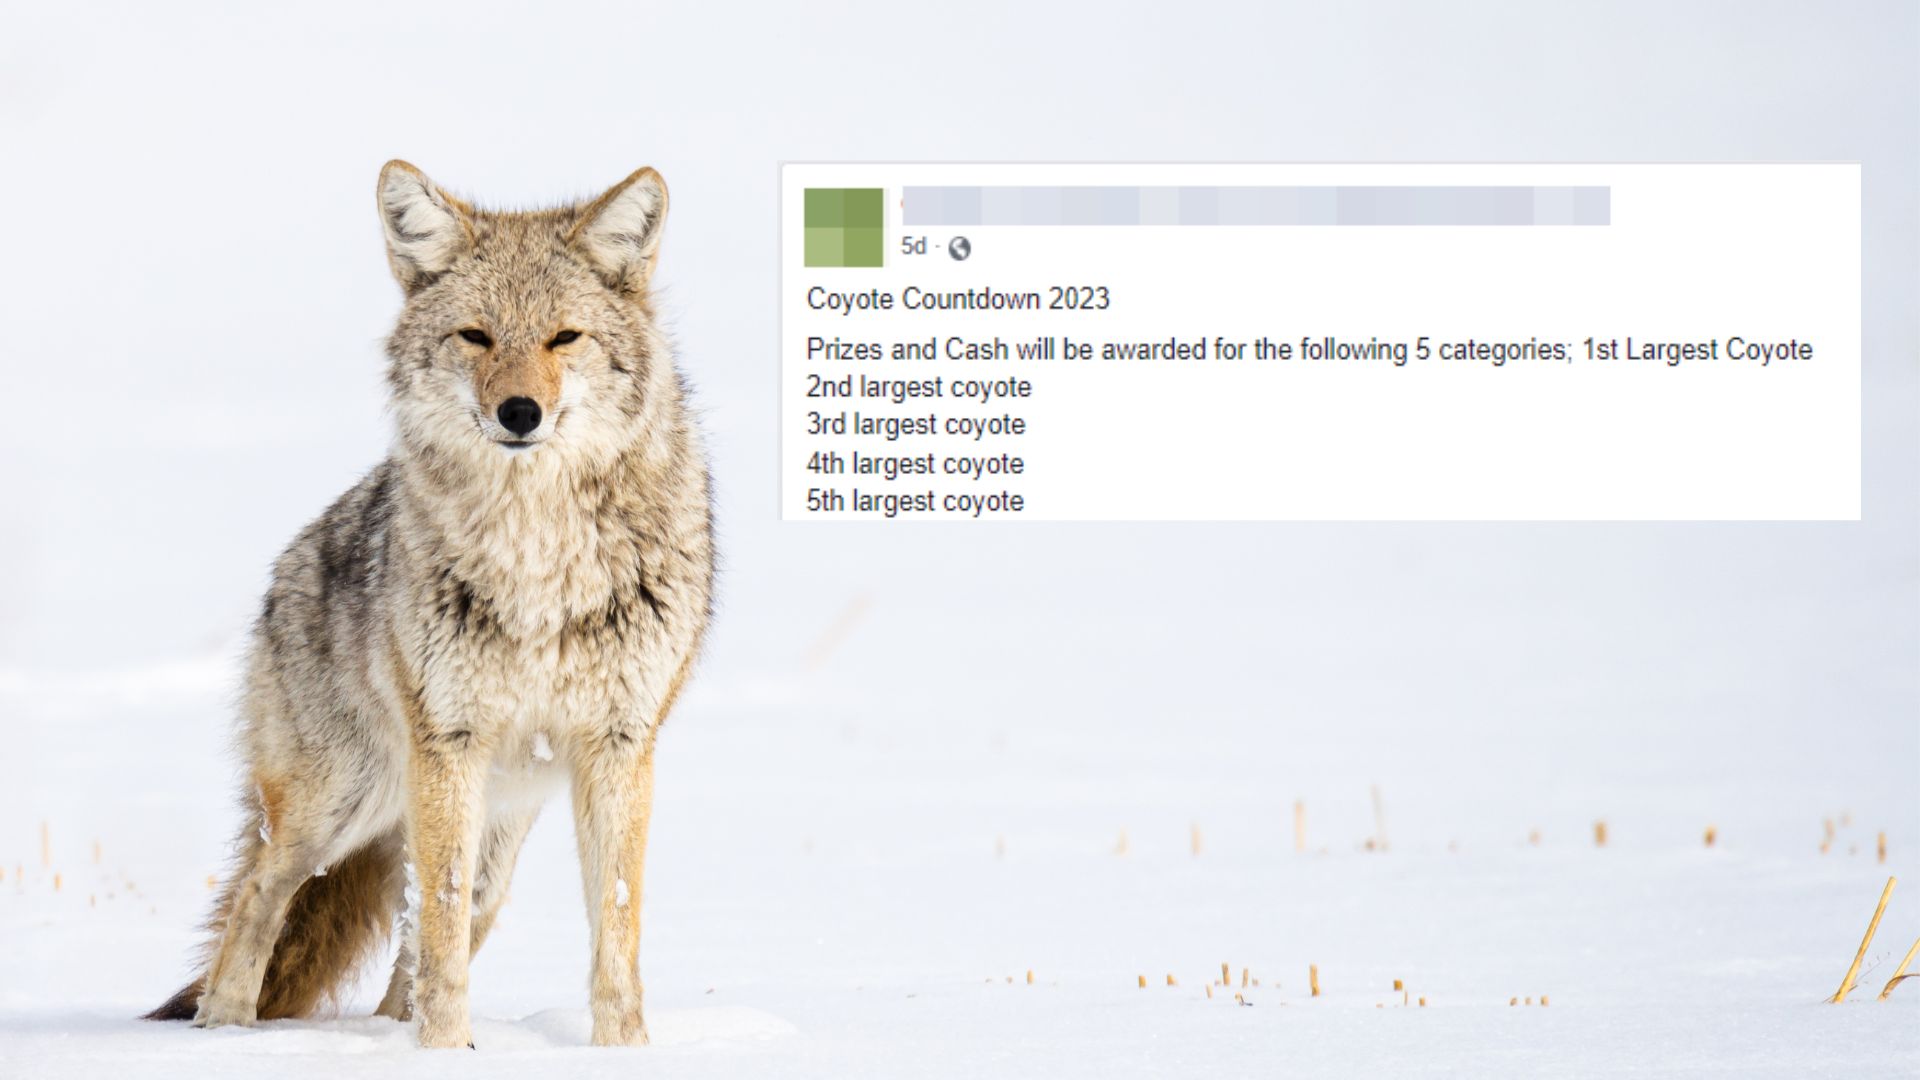 Image shows coyote with screenshot from Facebook